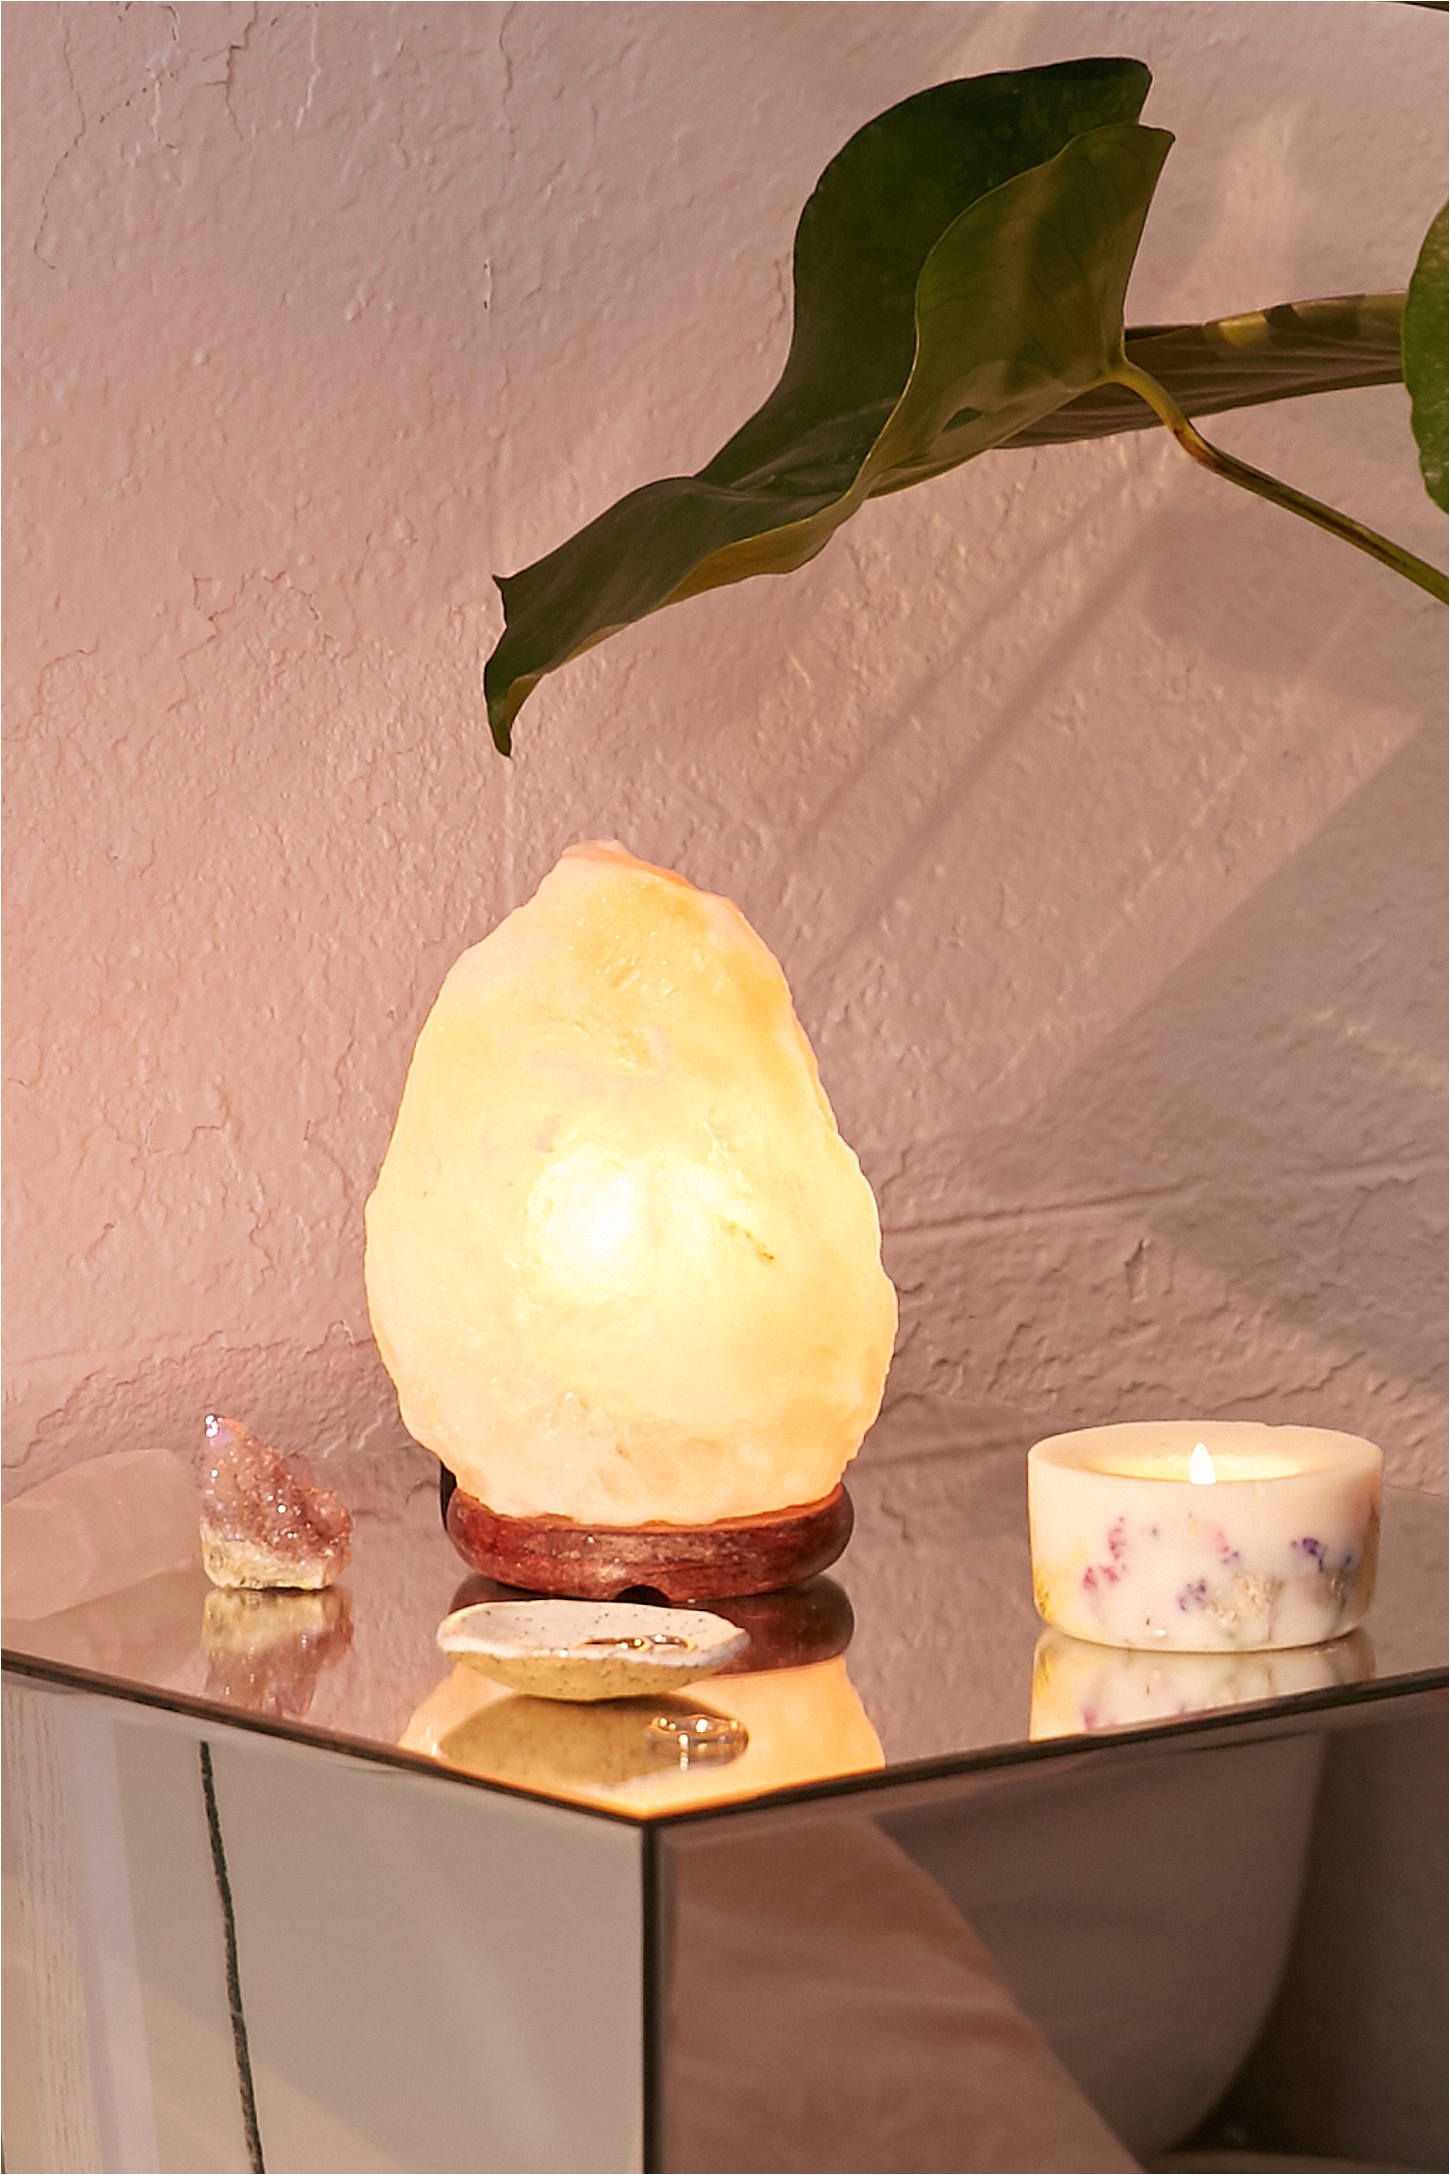 shop himalayan salt lamp at urban outfitters today we carry all the latest styles colors and brands for you to choose from right here